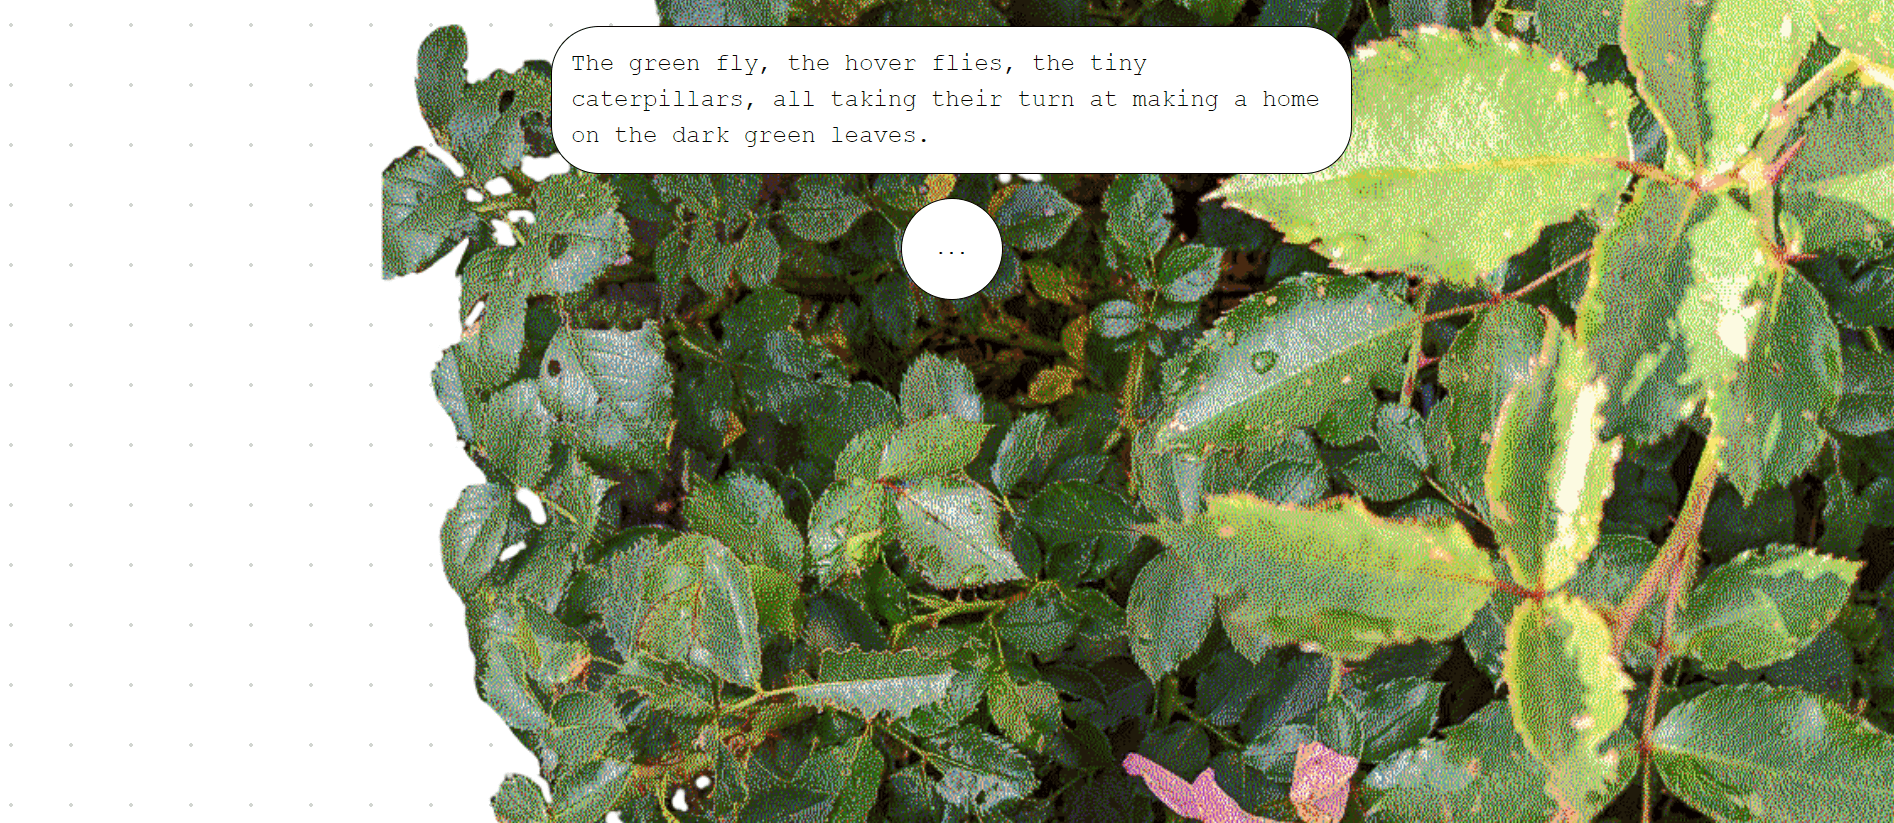 website,text: the green fly, the hoverflies, the tiny caterpillars, all taking their turn at making a home on the dark green leaves. background: closeup of green bush with dithering effect